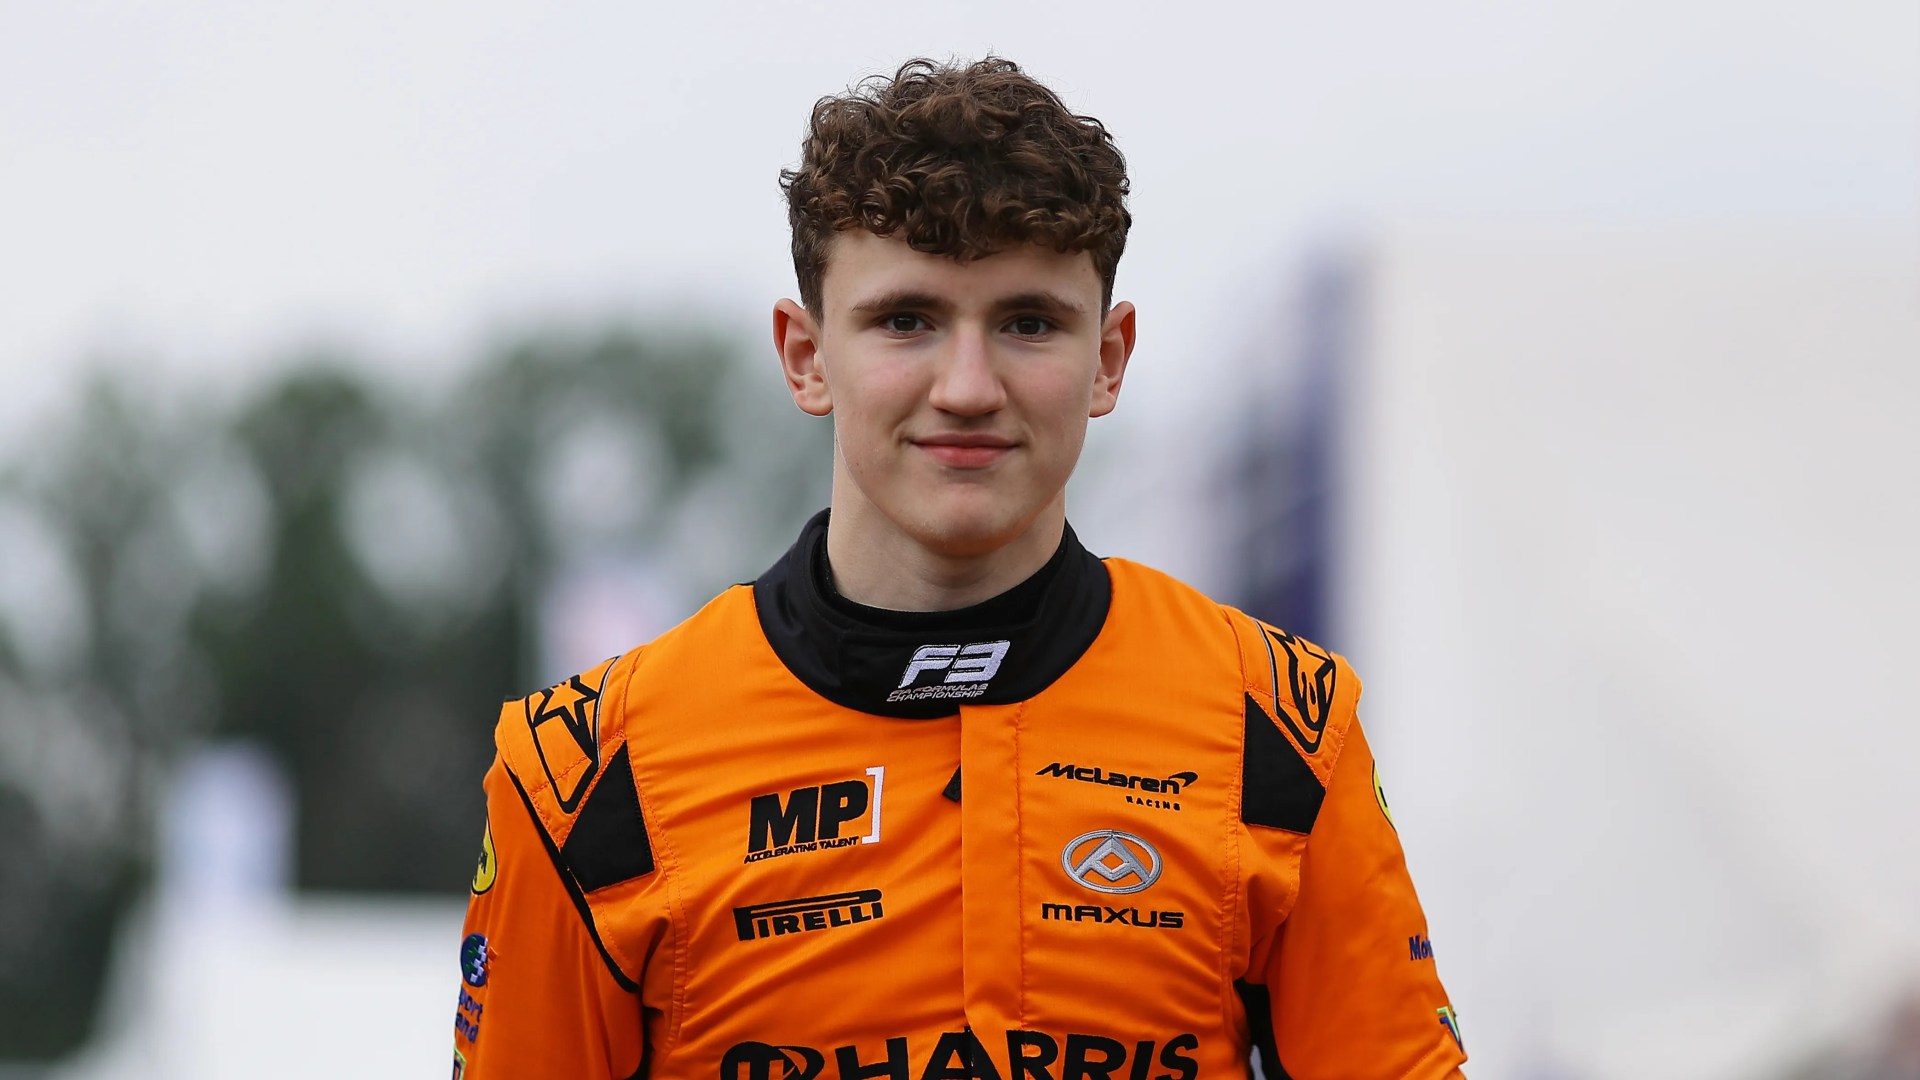 Irish teen following in footsteps of Lewis Hamilton as he marks milestone in budding racing career with F1 giants [Video]